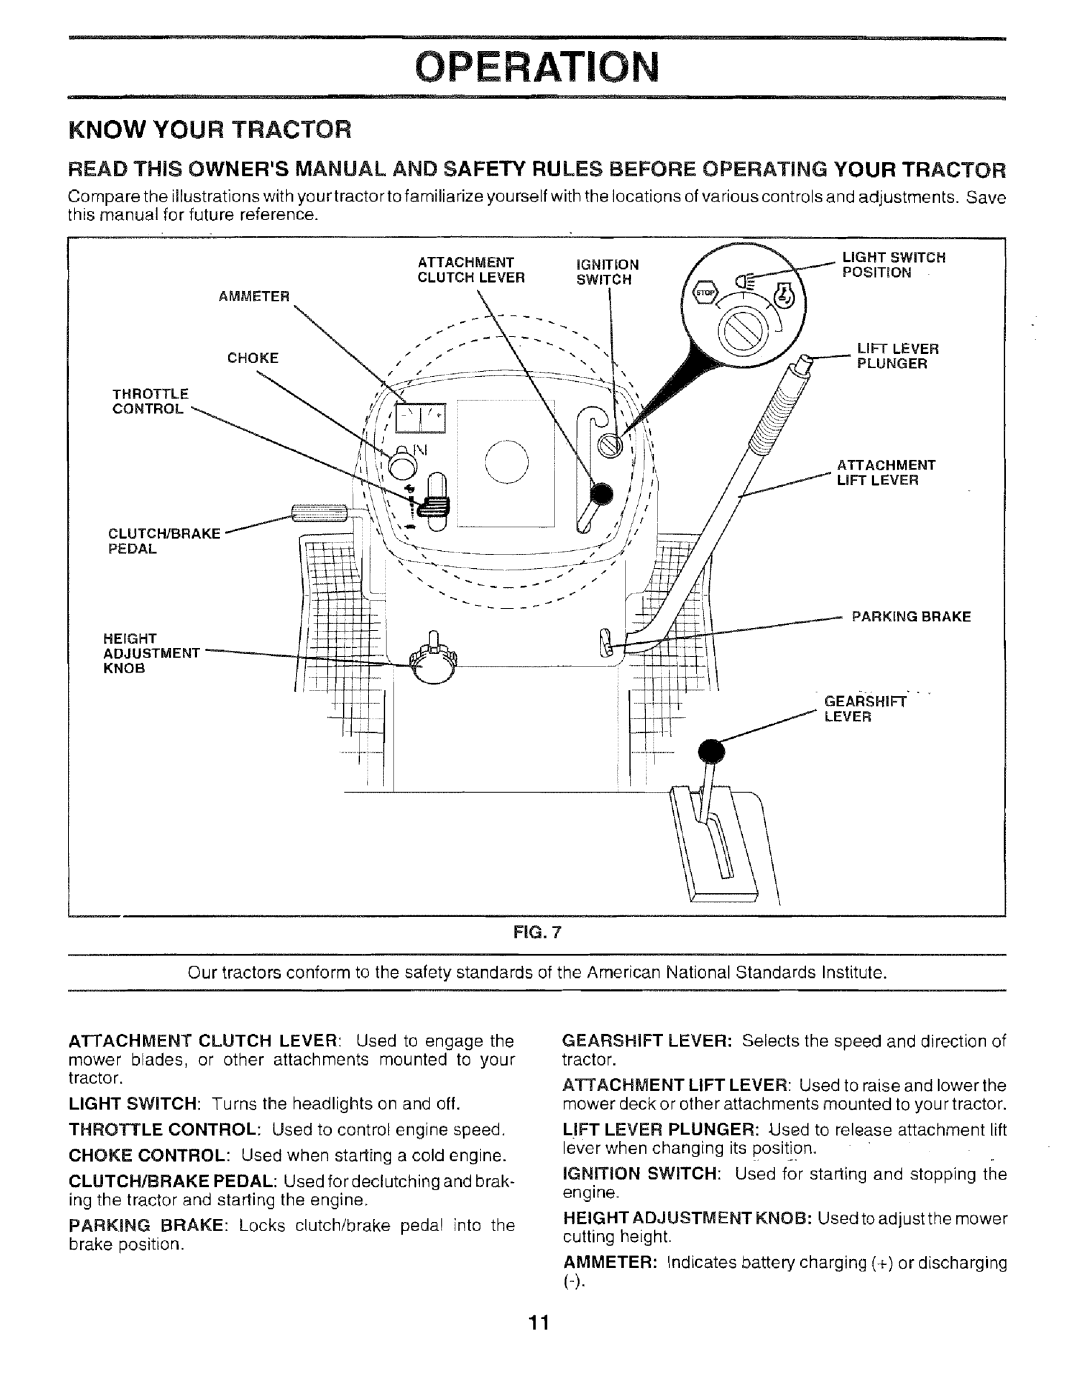 Sears 917.259567 owner manual Operatic, Know Your Tractor, ATTACHMENT CLUTCH LEVER: Used to engage the 